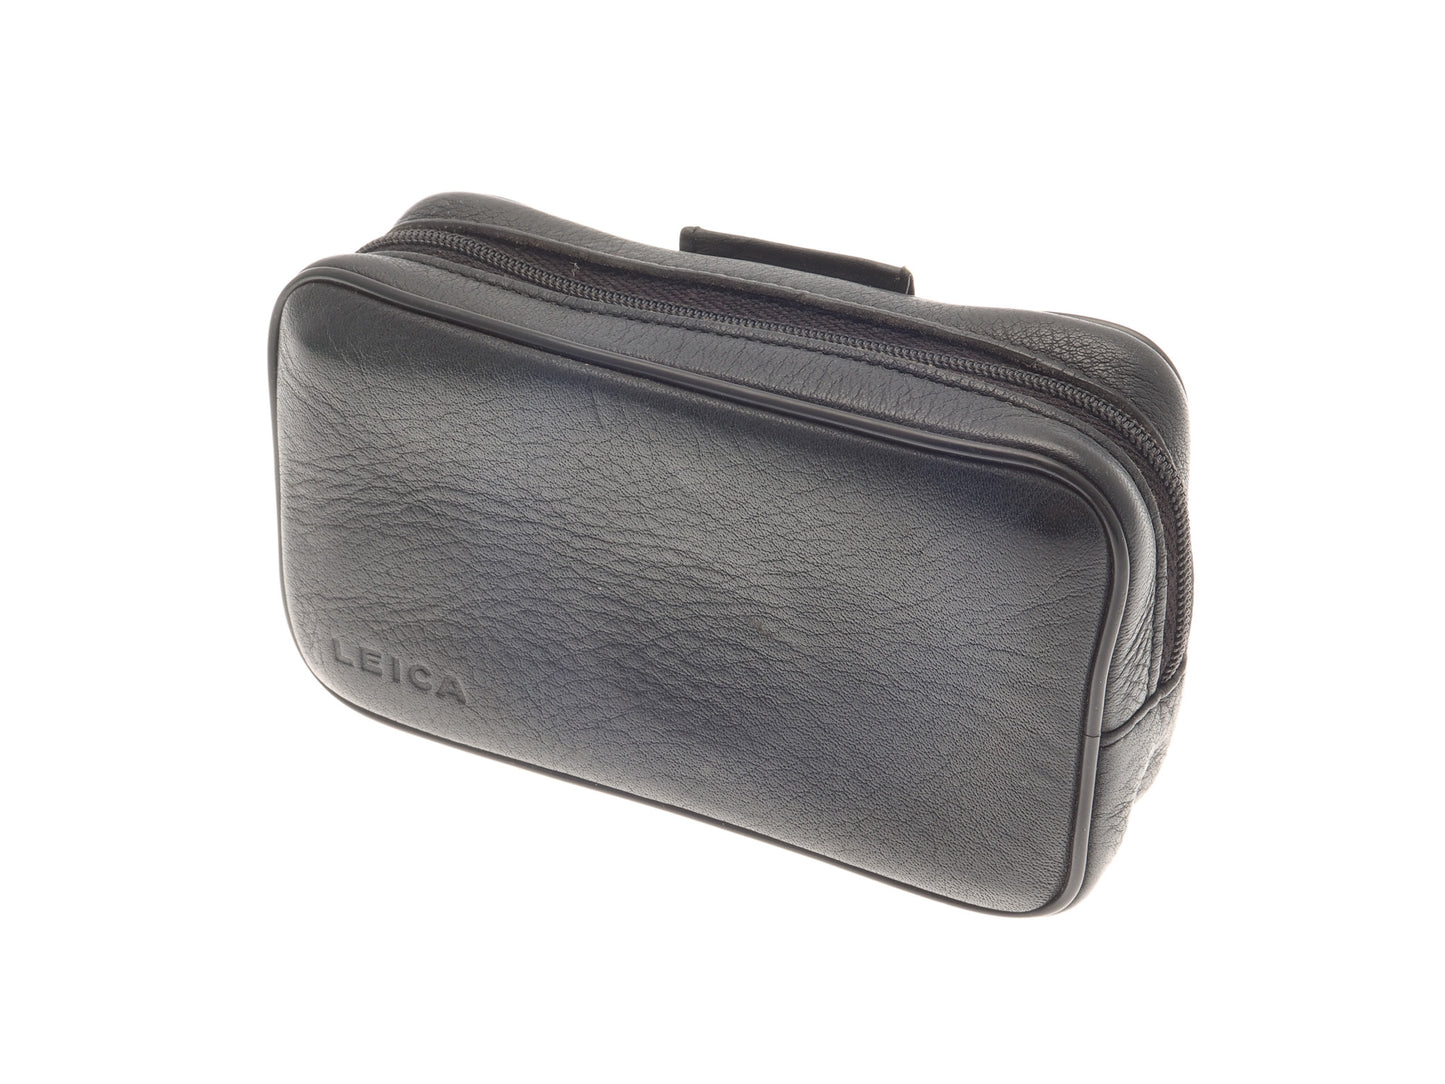 Leica Soft Leather Case for Minilux - Accessory